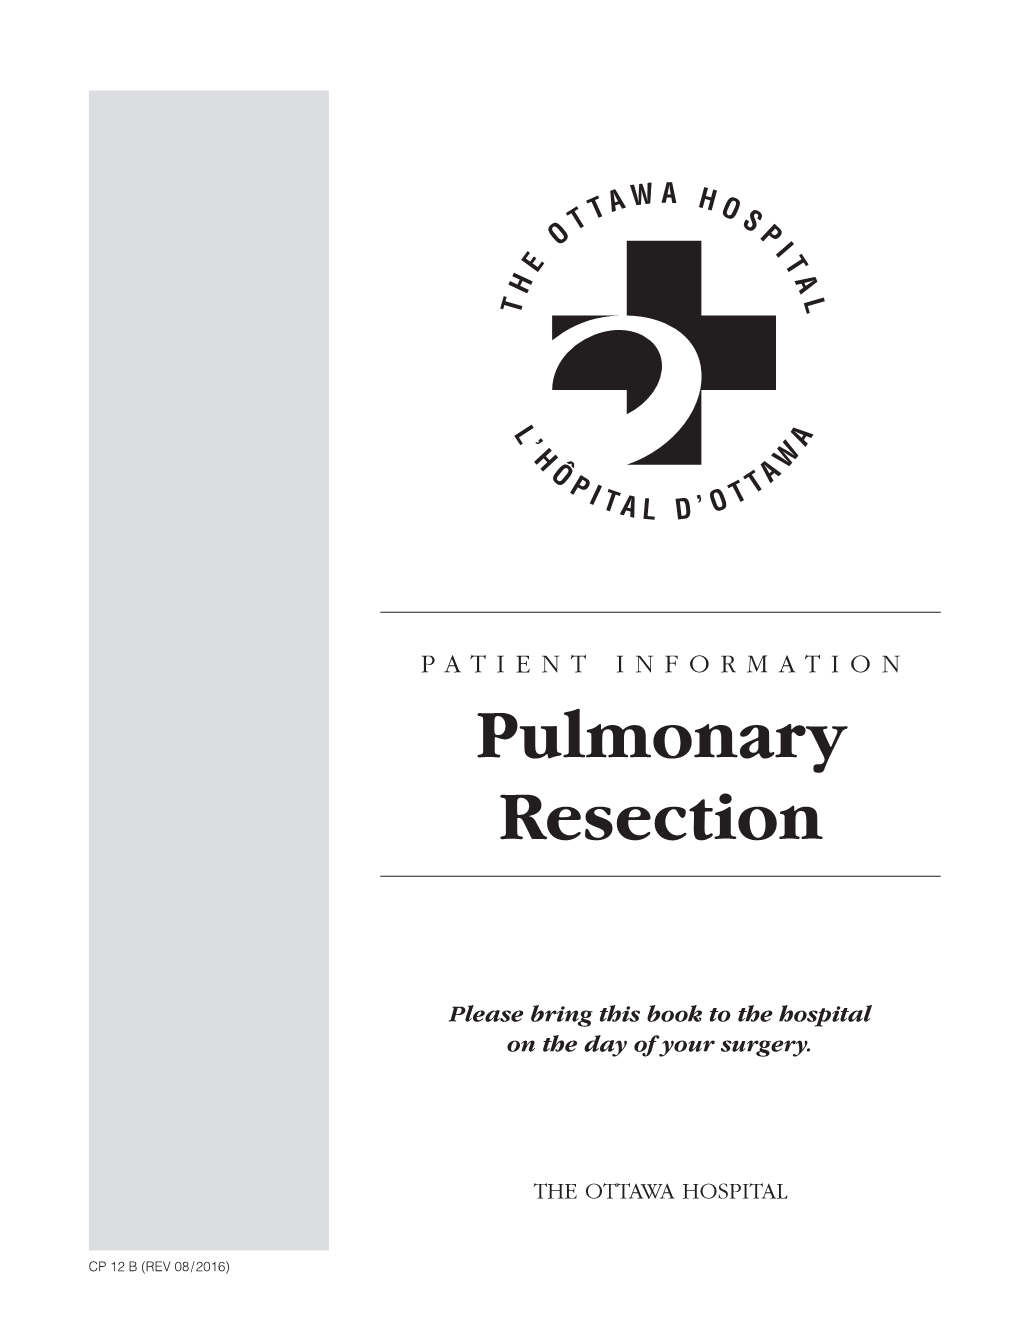 PATIENT INFORMATION Pulmonary Resection